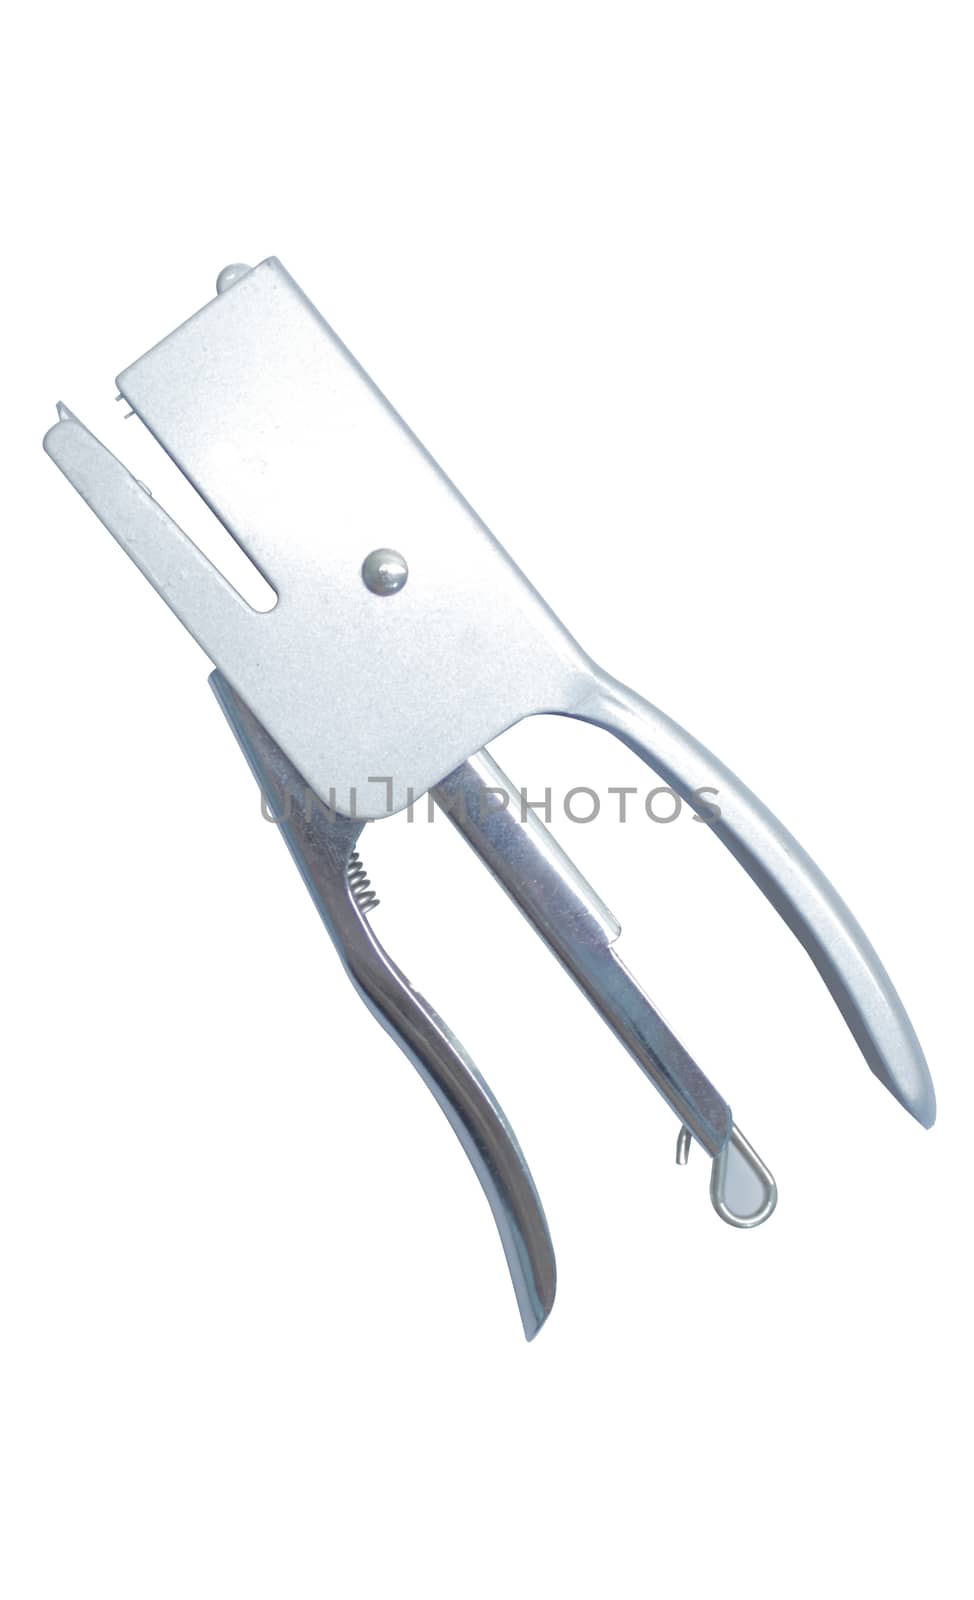 Insulated metal stapler in grey on a white background .Texture or background